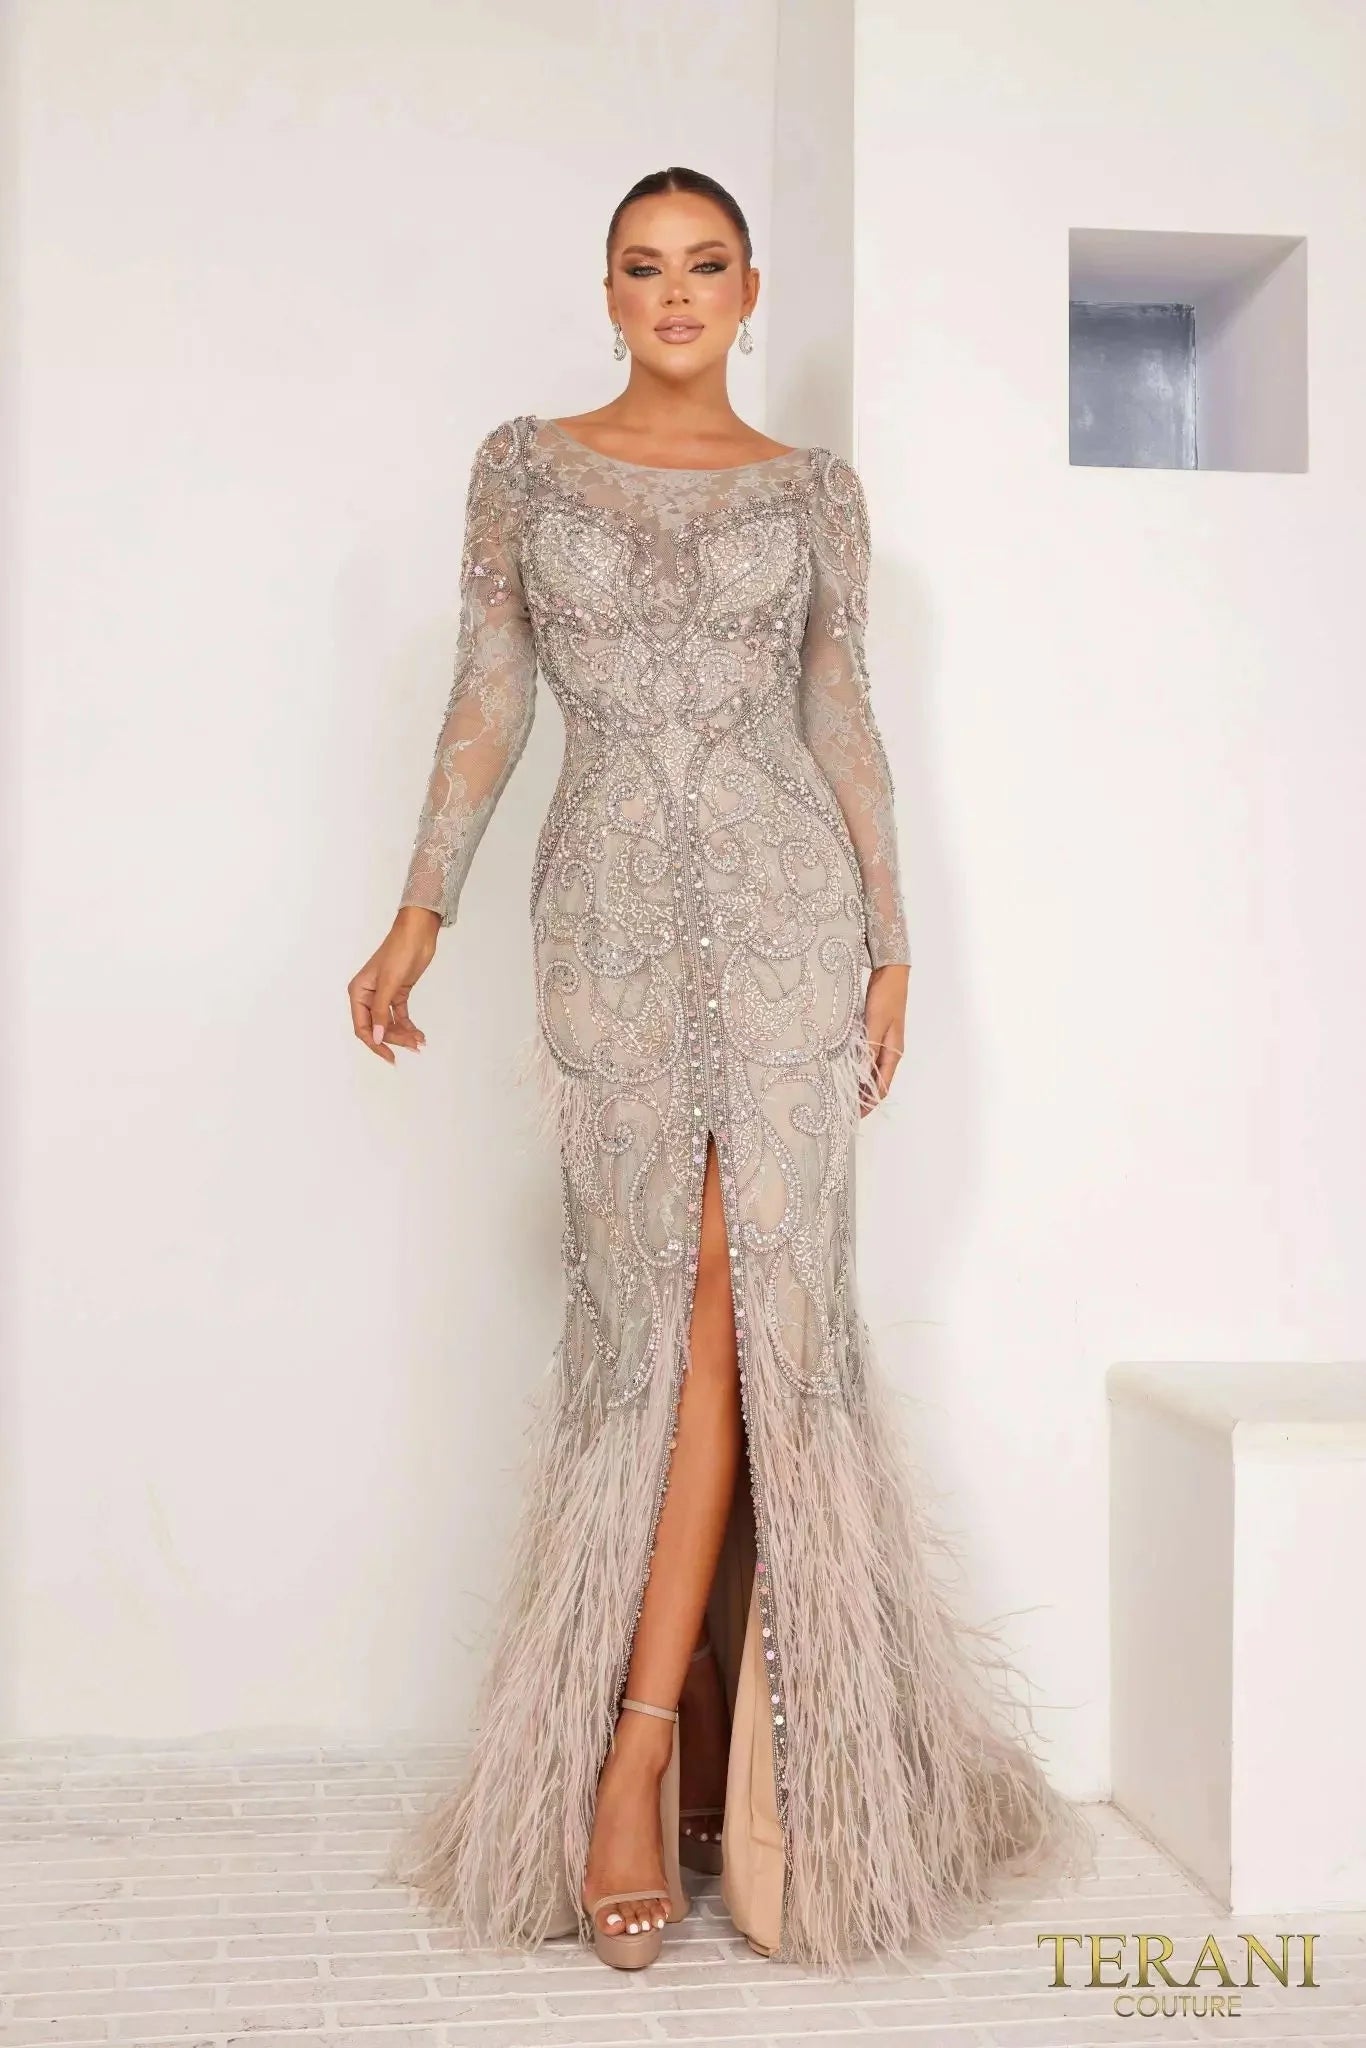 Terani Couture 241GL2698 - Long Sleeve Beaded Dress Special Occasion Dress